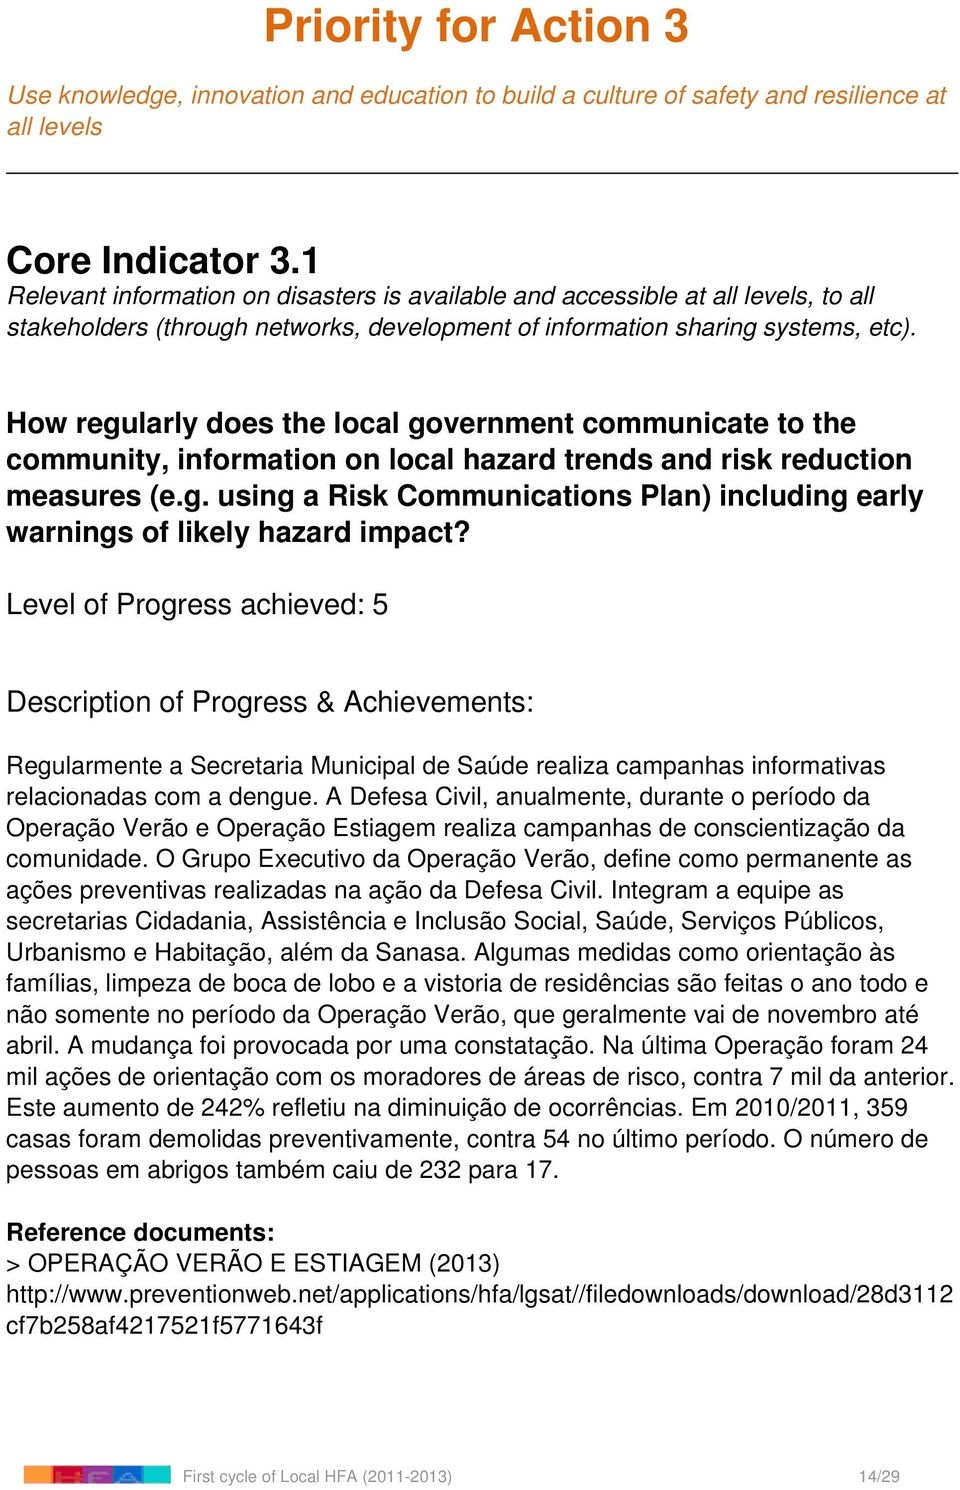 How regularly does the local government communicate to the community, information on local hazard trends and risk reduction measures (e.g. using a Risk Communications Plan) including early warnings of likely hazard impact?